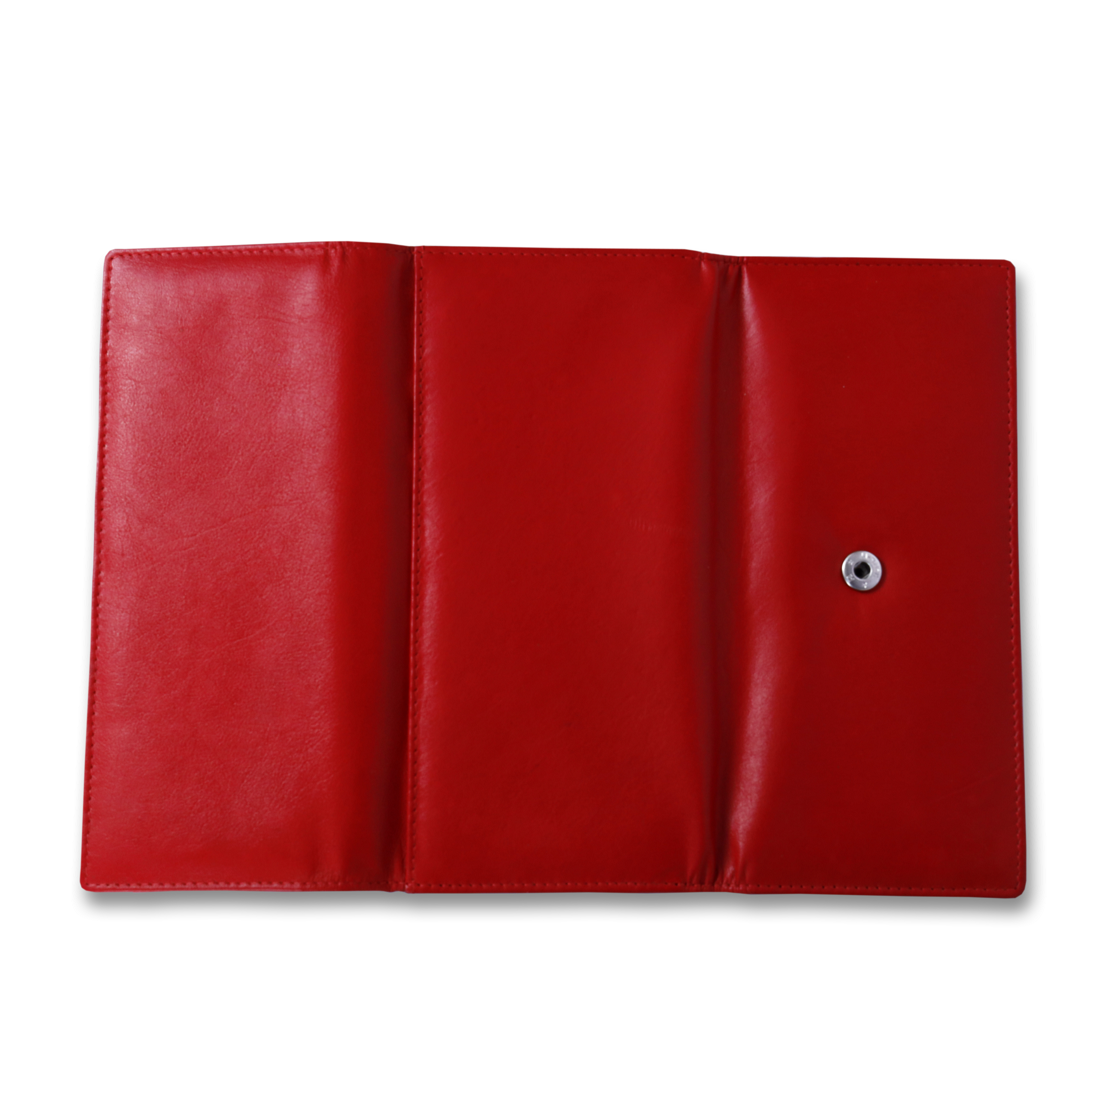 Leather Solid Red Women Wallet